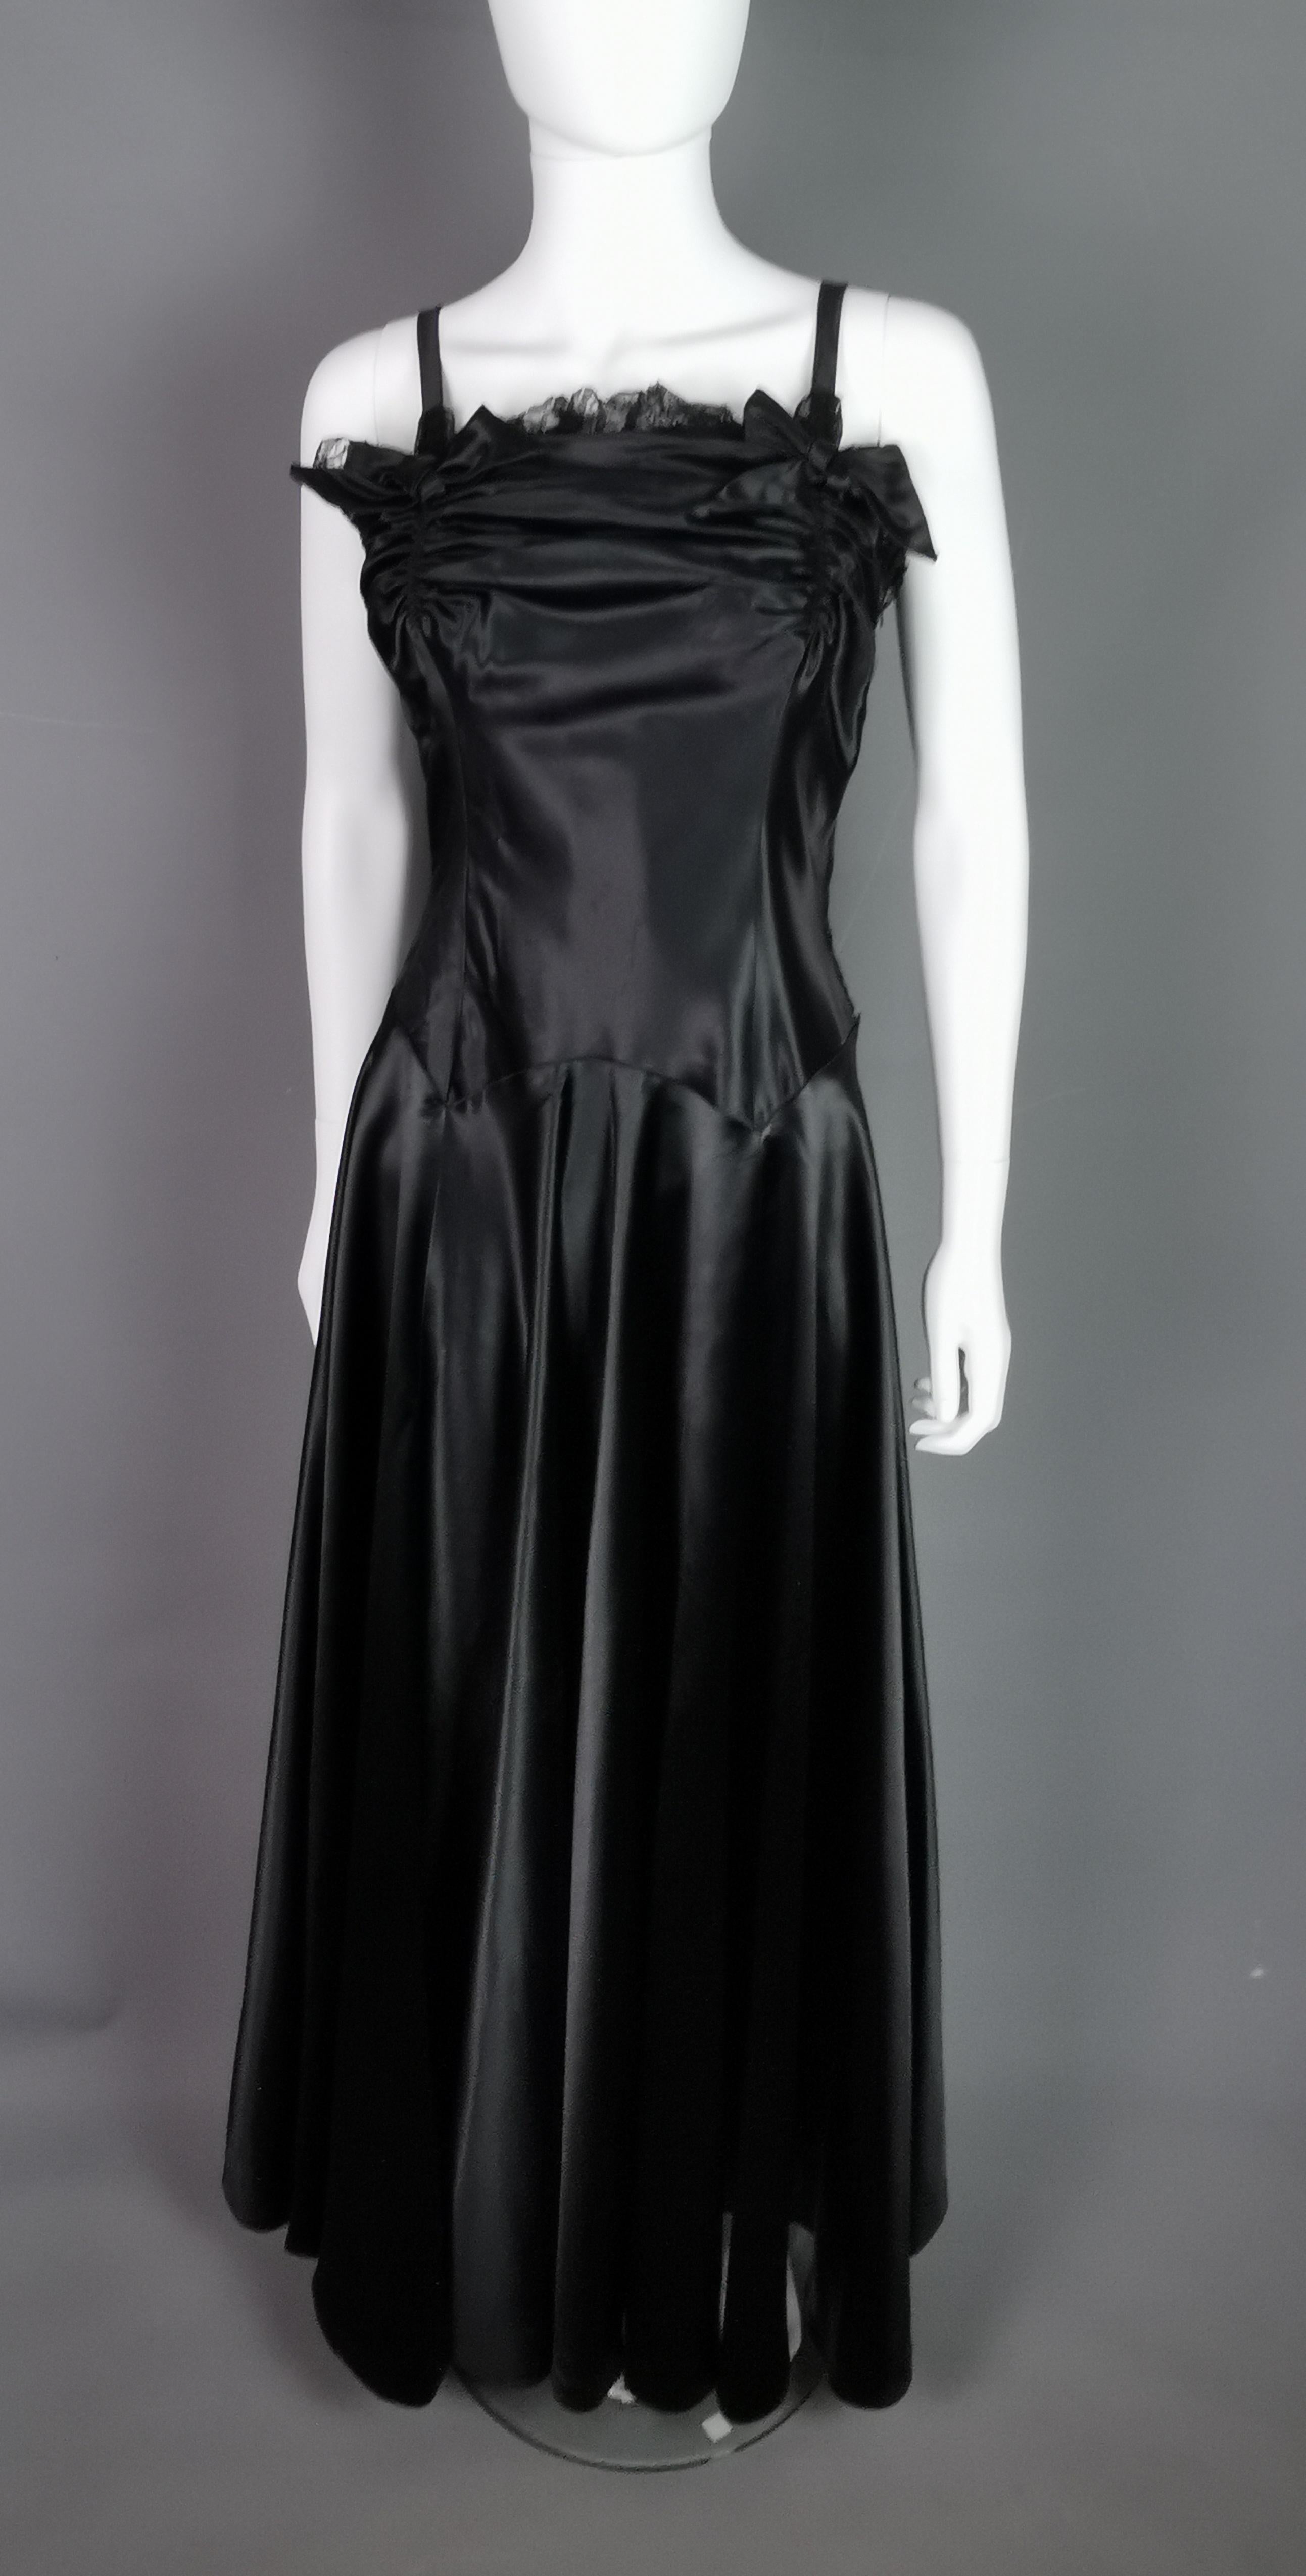 This rare vintage 1940's evening dress is really the stuff dresses are made of!

A superbly gorgeous design, the dress is very figure flattering and made from rich inky Black, liquid satin that falls and flows so elegantly.

It is a sleeveless dress